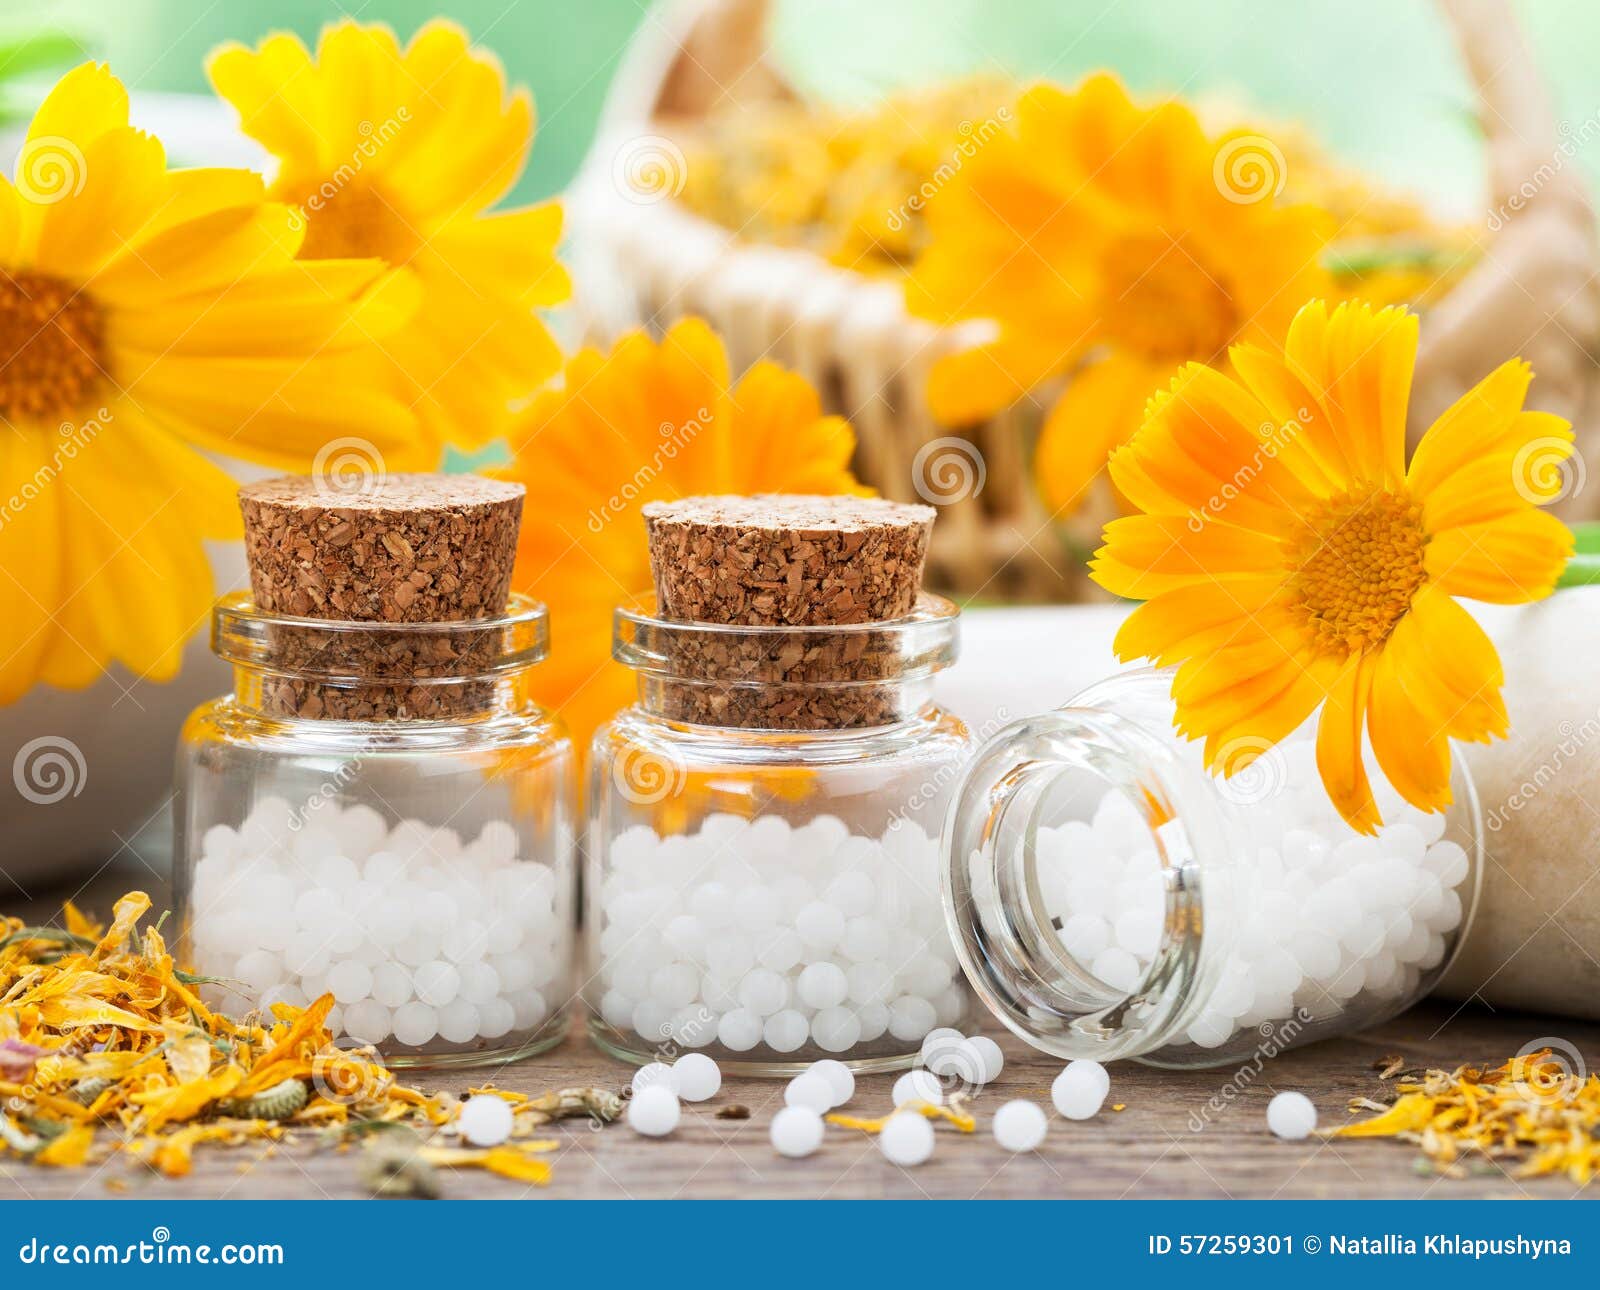 bottles of homeopathy globules and marigold flowers.